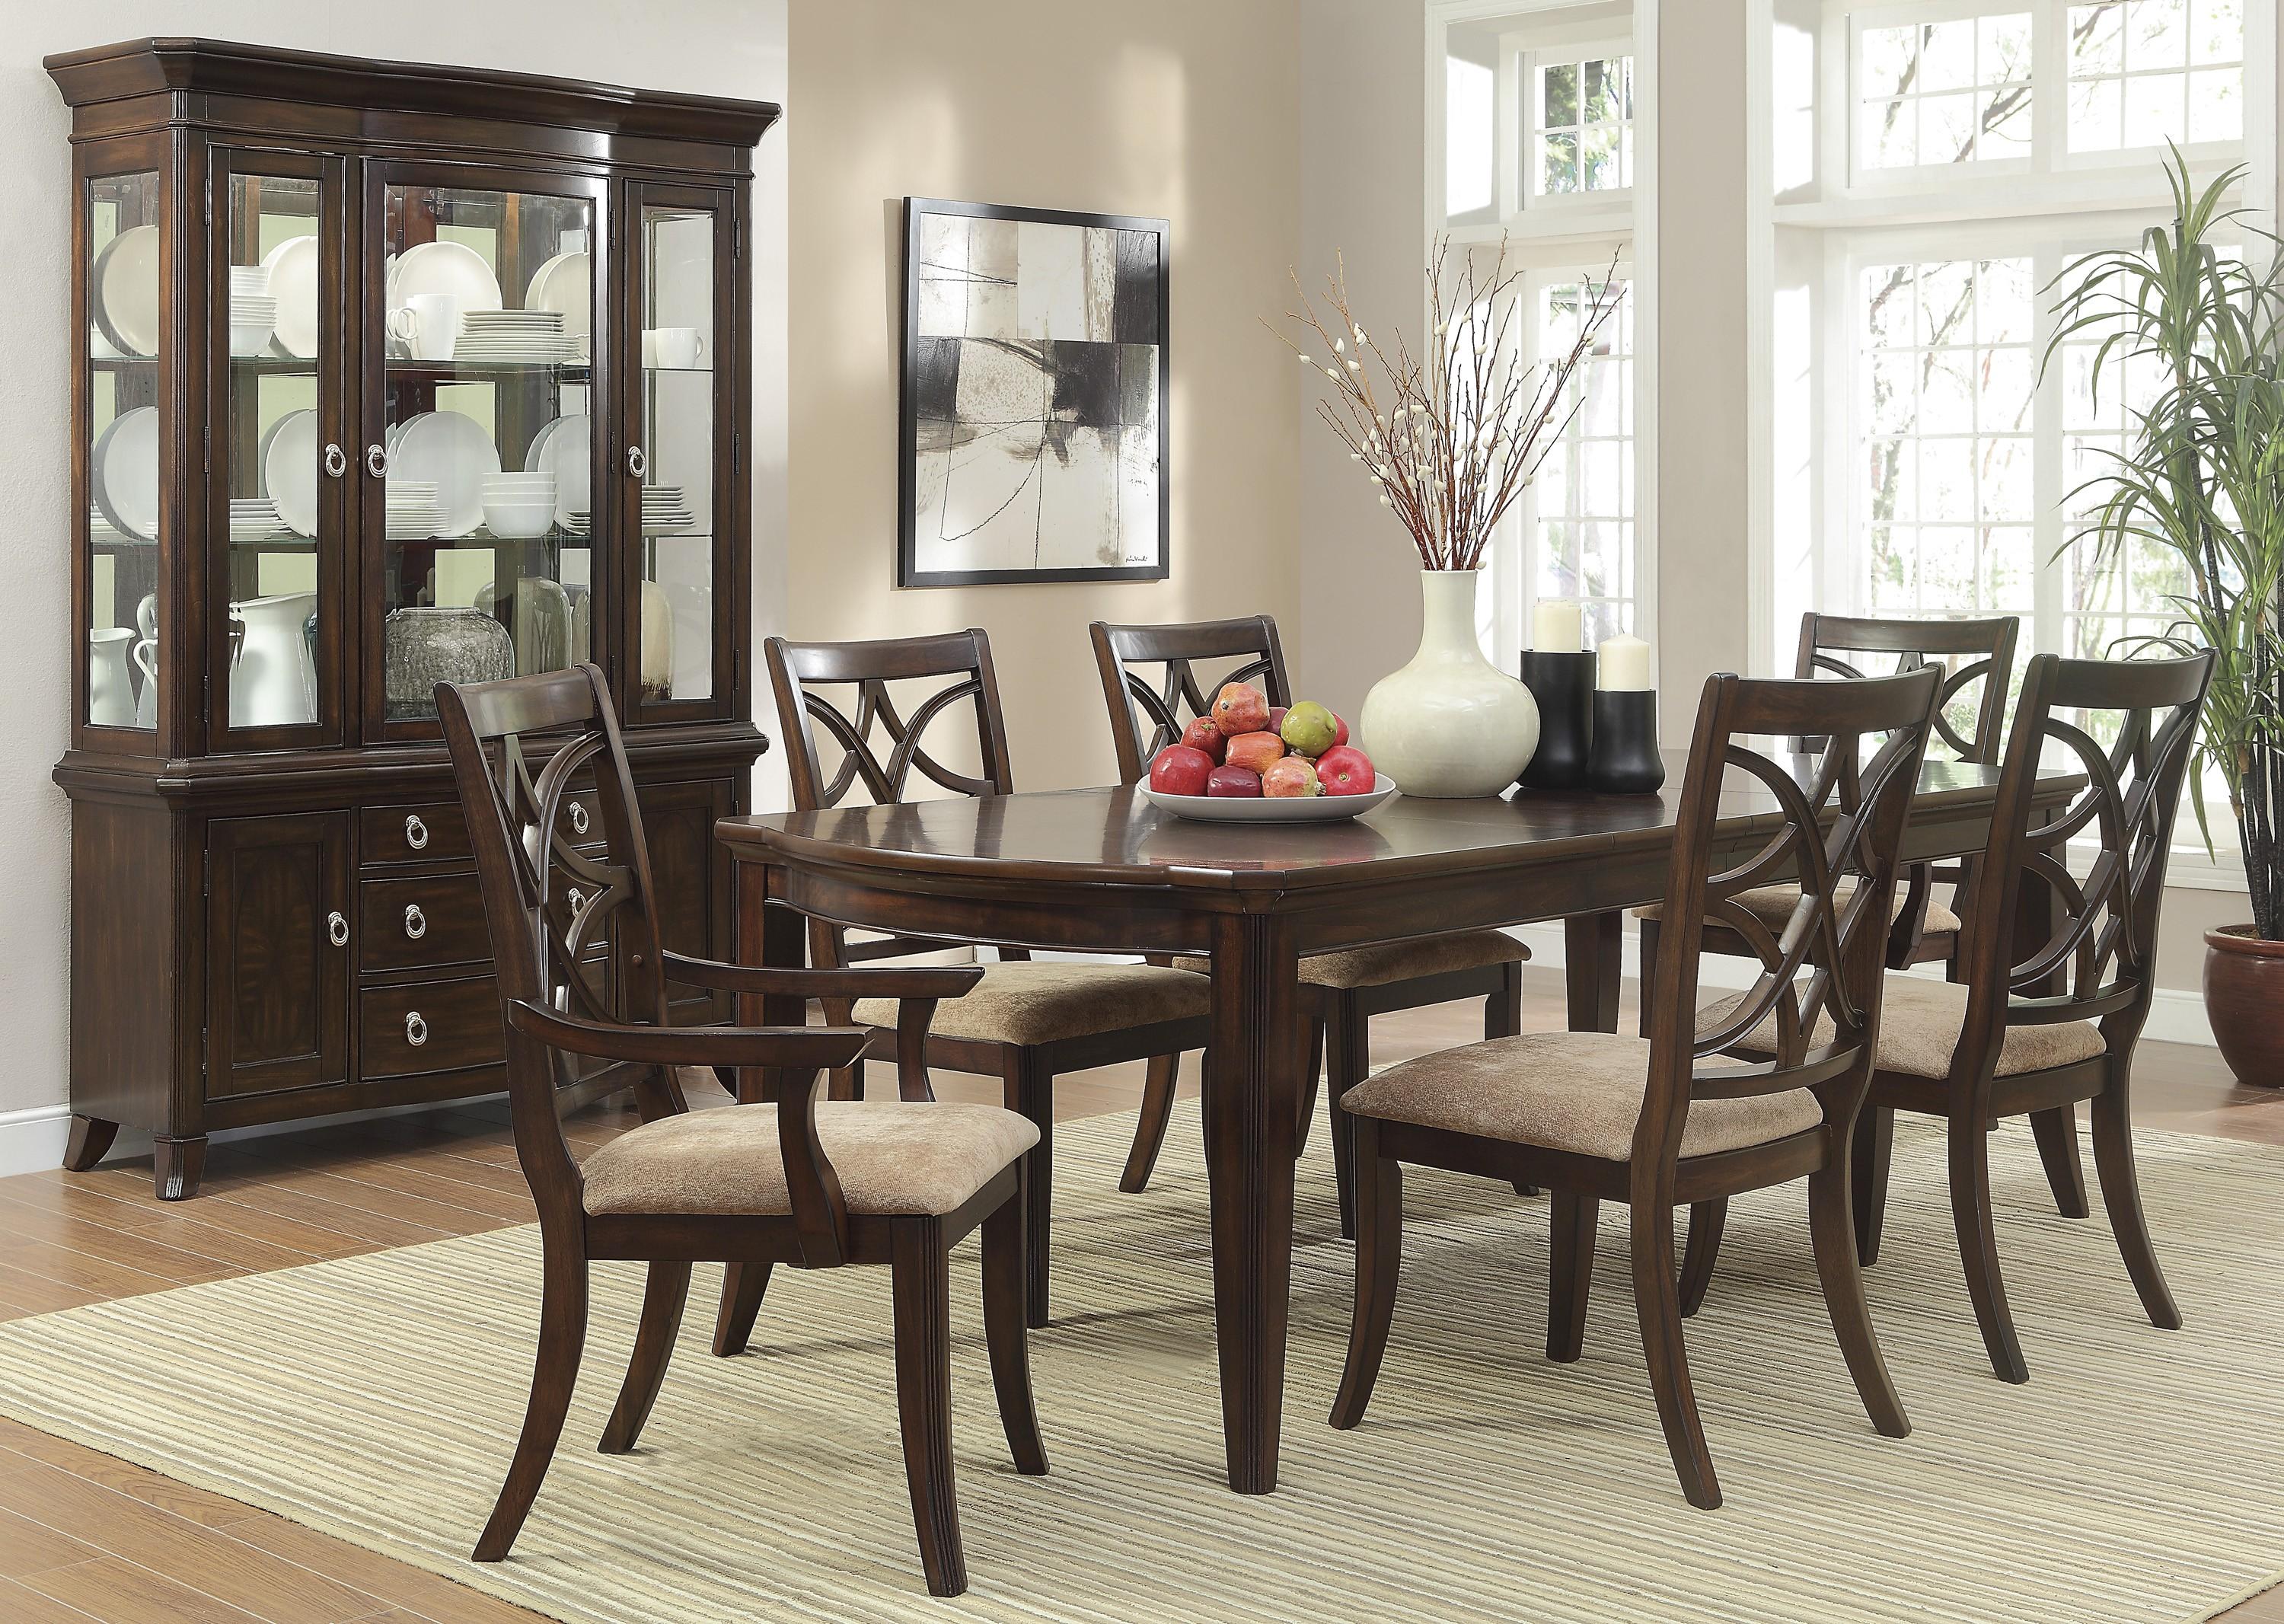 Traditional Dining Room Set 2546-96*8PC Keegan 2546-96*8PC in Cherry Chenille